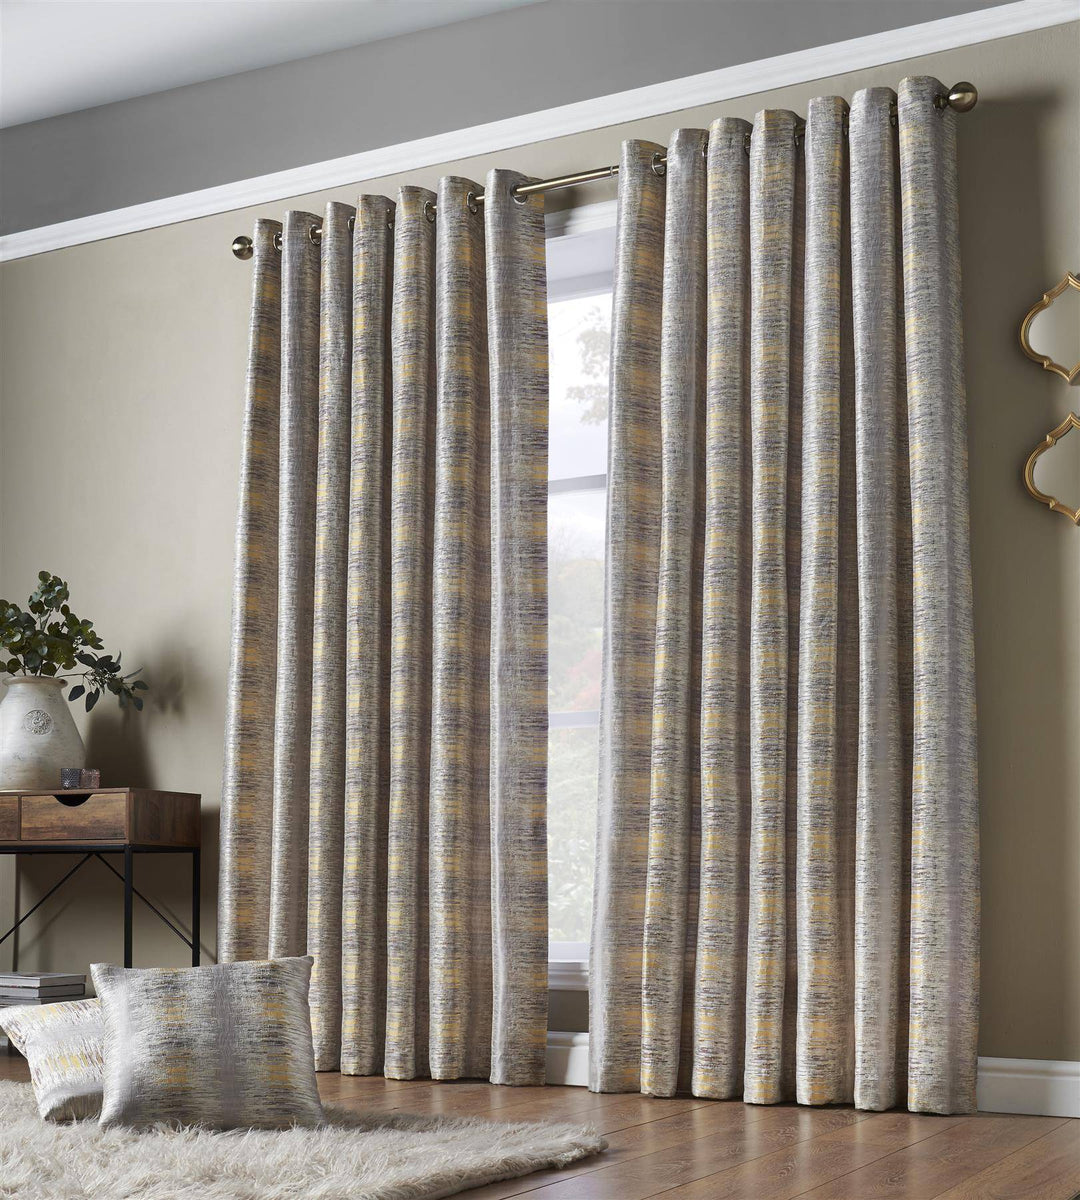 Reflections (Ring Top Curtains) - TidySpaces